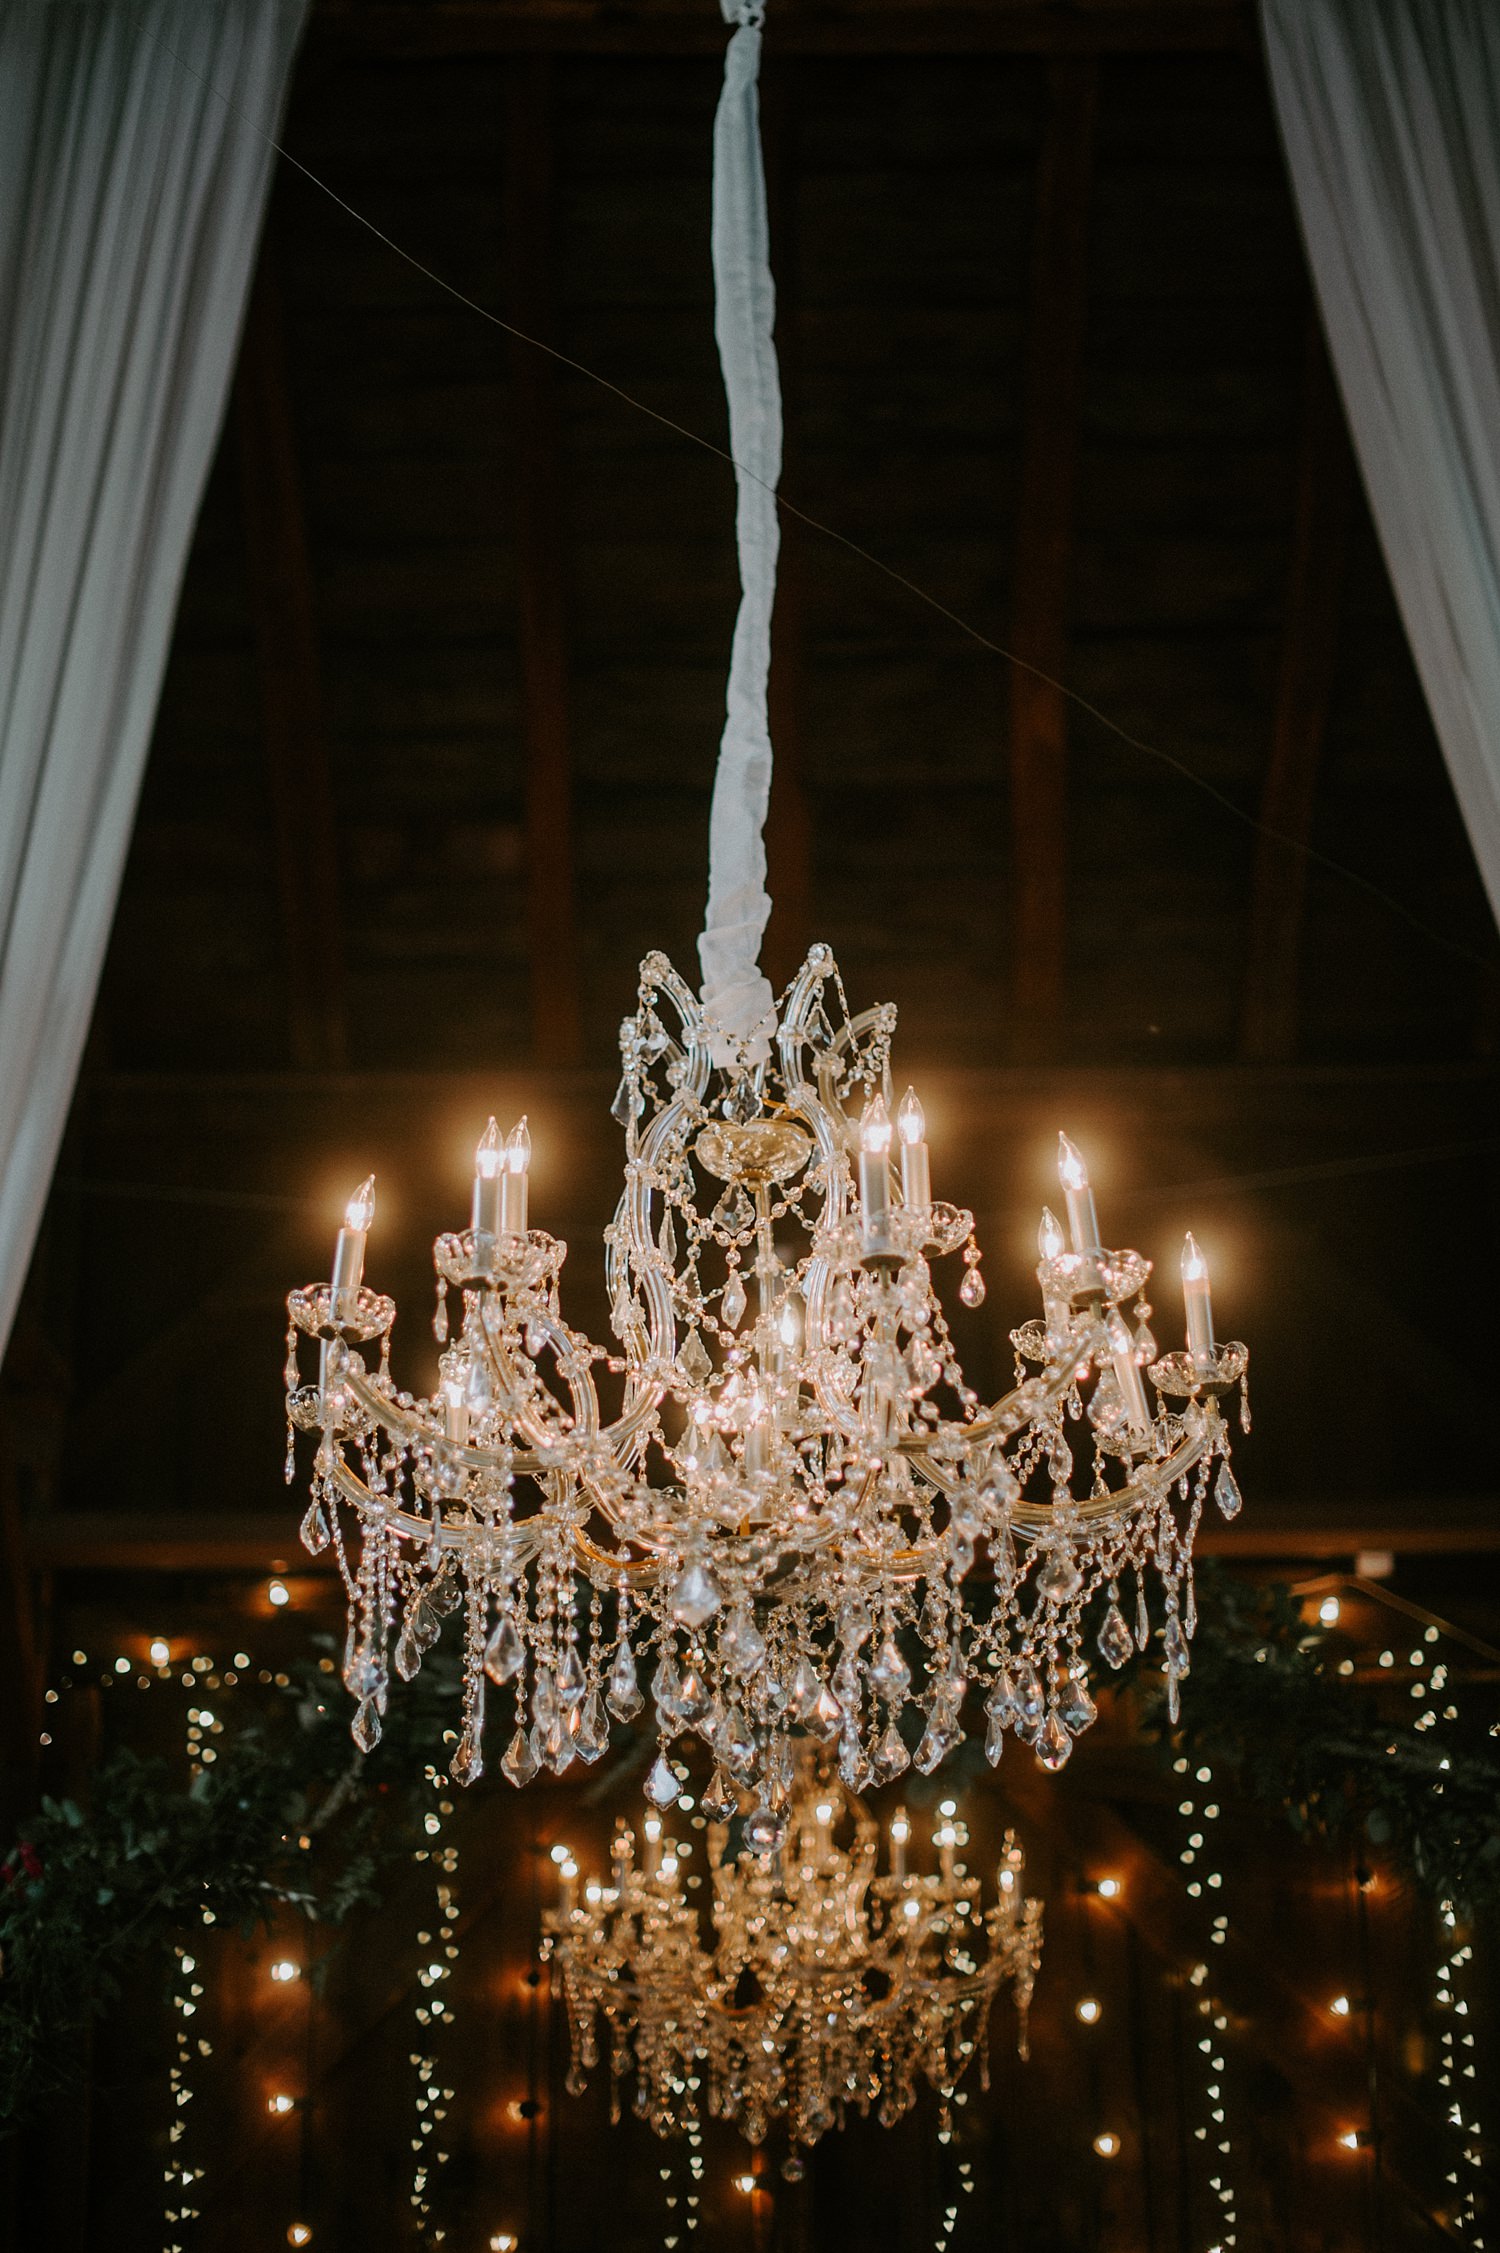 Glamorous and rustic wedding with draping and chandeliers at The Webb Barn in Wethersfield, CT